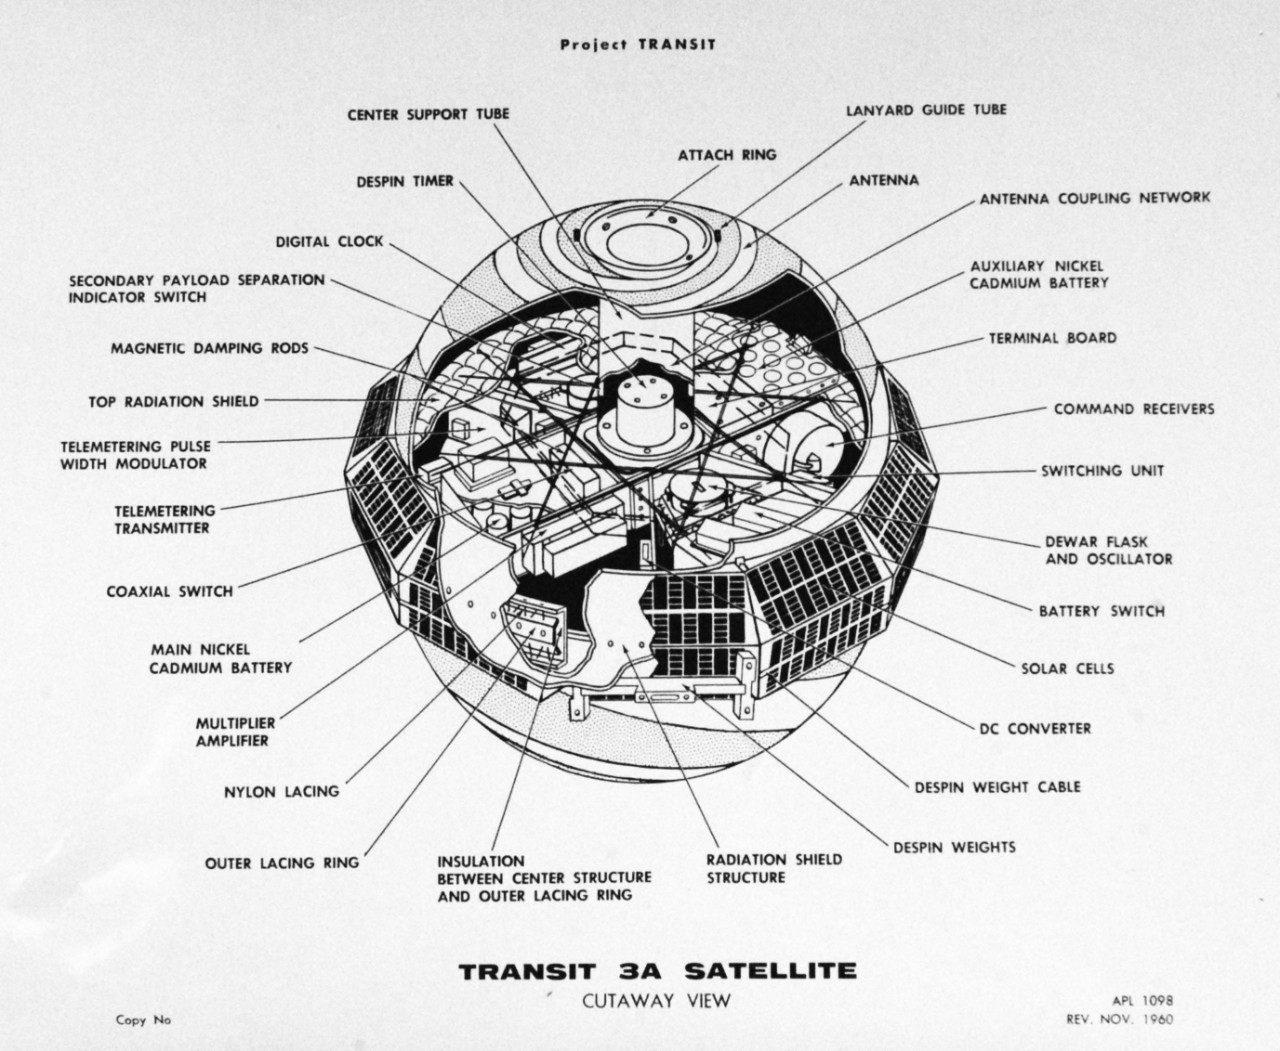 USN 710827:  New Navigational Satellite.  Cutaway view of the Transit III-A Navigational Satellite.  Photograph released November 11, 1960.  Official U.S. Navy Photograph, now in the collections of the National Archives.  